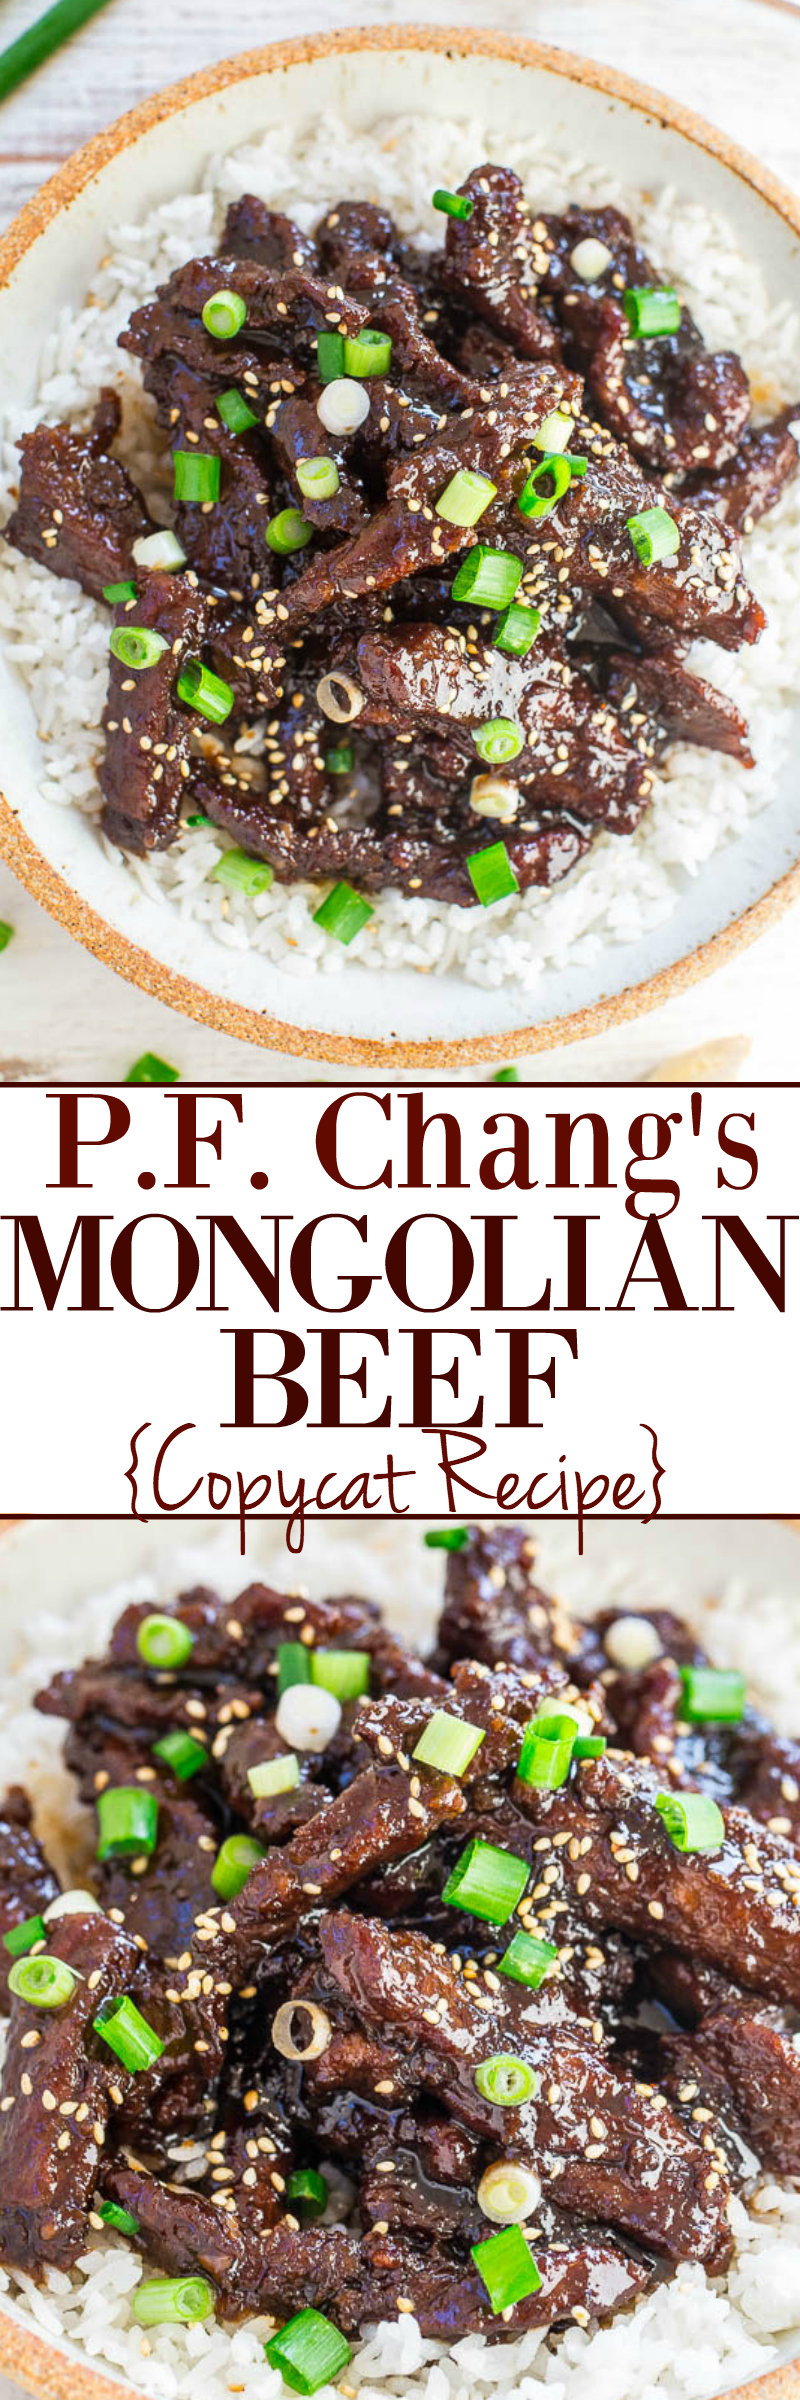 P.F. Chang's Mongolian Beef (Copycat Recipe) - Make the restaurant favorite AT HOME in 20 minutes!! EASY and it has so much FLAVOR! Tastes even BETTER than the restaurant version!!